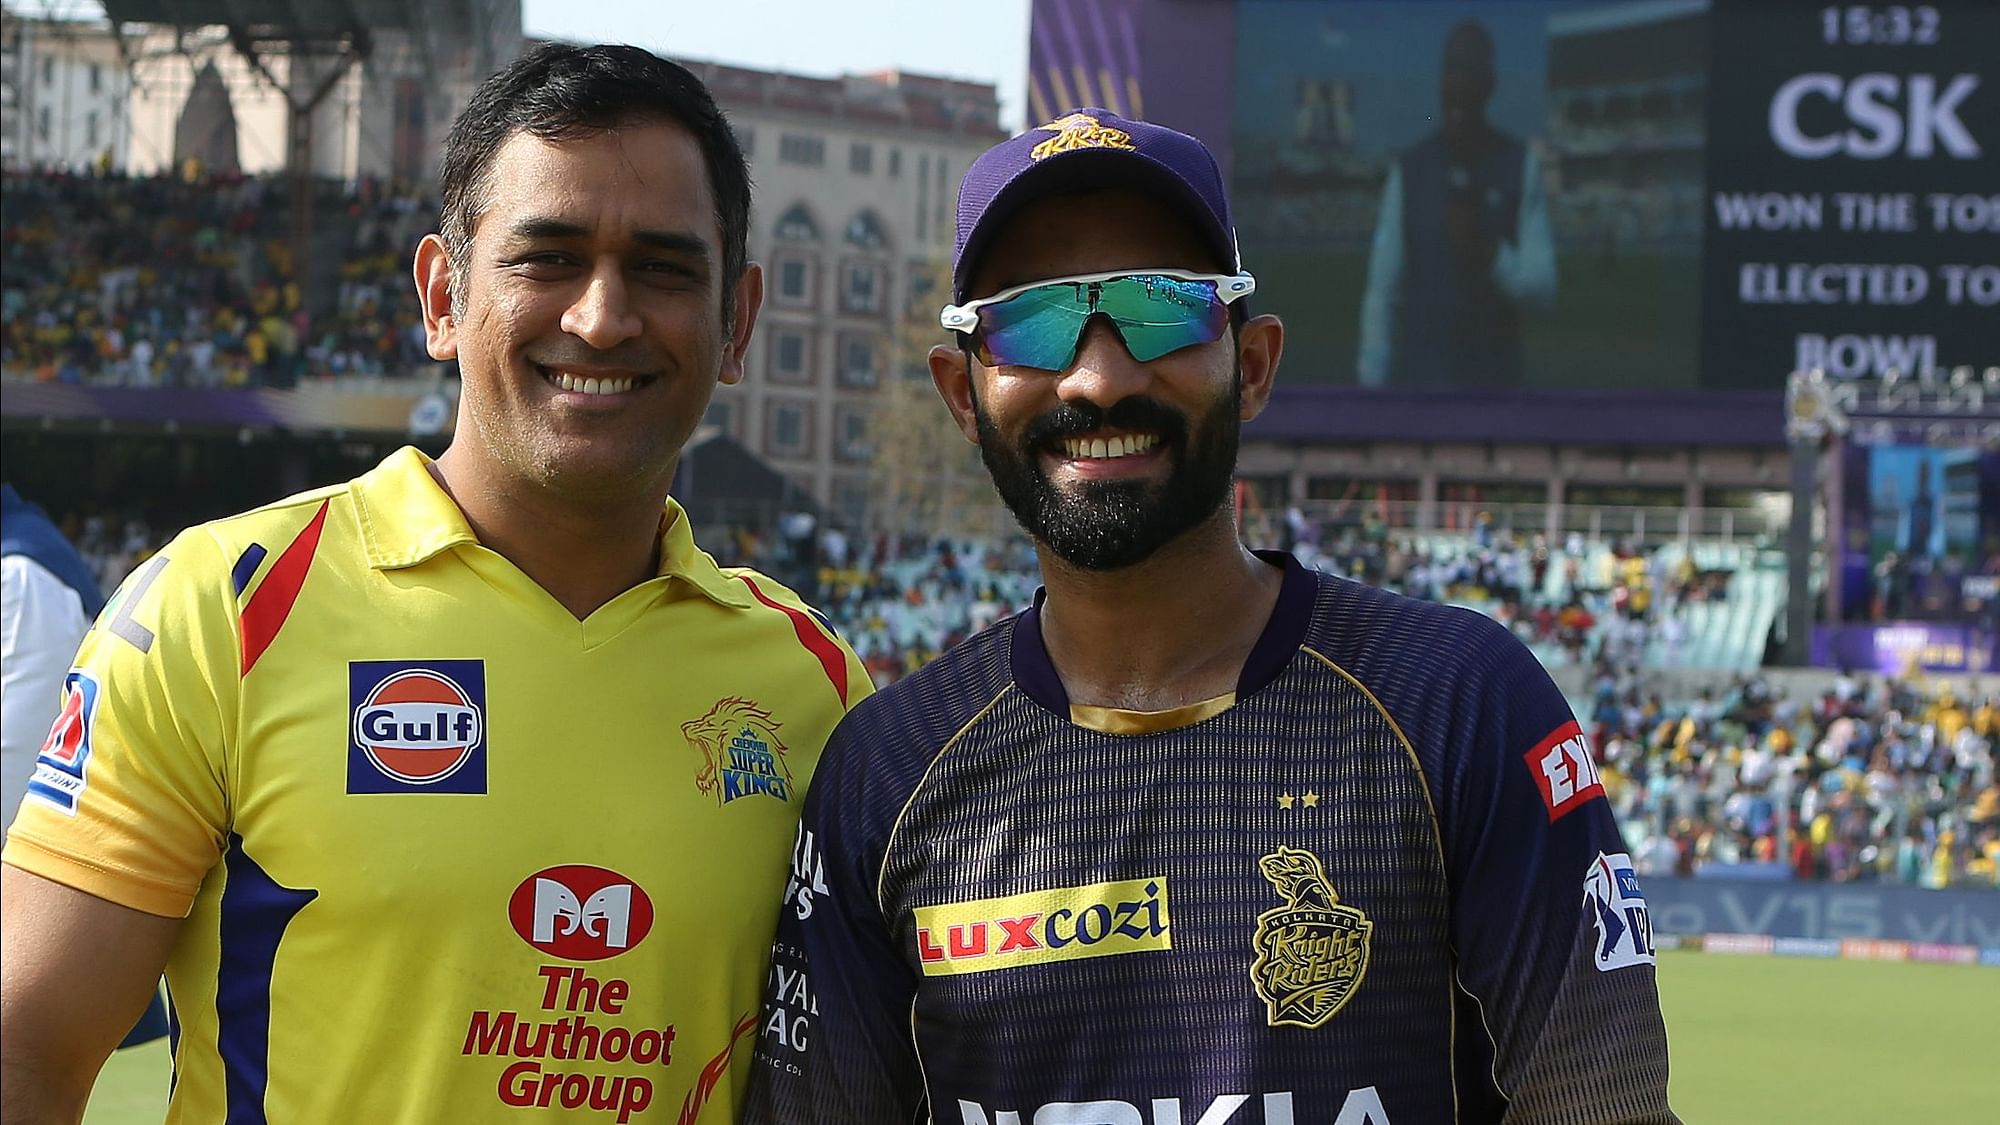 MS Dhoni (c) of Chennai Super Kings and Dinesh Karthik (c) of Kolkata Knight Riders at the toss during match 29 of the Vivo Indian Premier League Season 12, 2019 between the Kolkata Knight Riders and the Chennai Super Kings  held at the Eden Gardens Stadium in Kolkata on the 14th April 2019&nbsp;